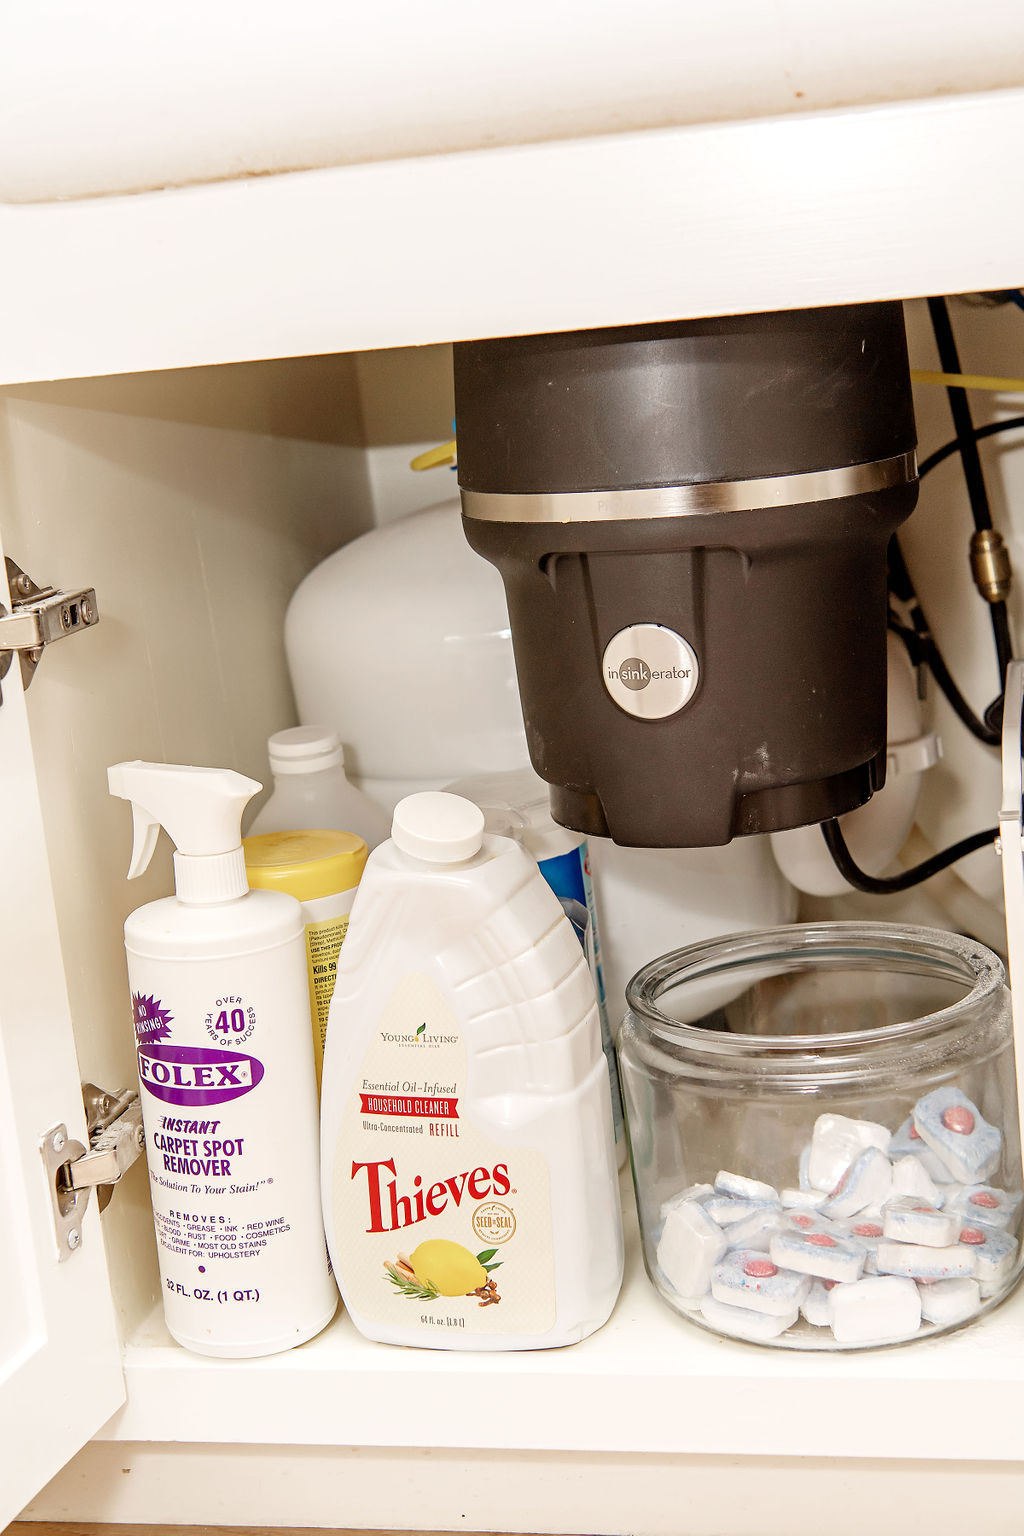 Under Bathroom Sink Organization by popular Houston lifestyle blog, Fancy Ashley: image of a bathroom under sink cabinet containing Thieve cleaning solution and a glass canister filled with dishwasher pods. 